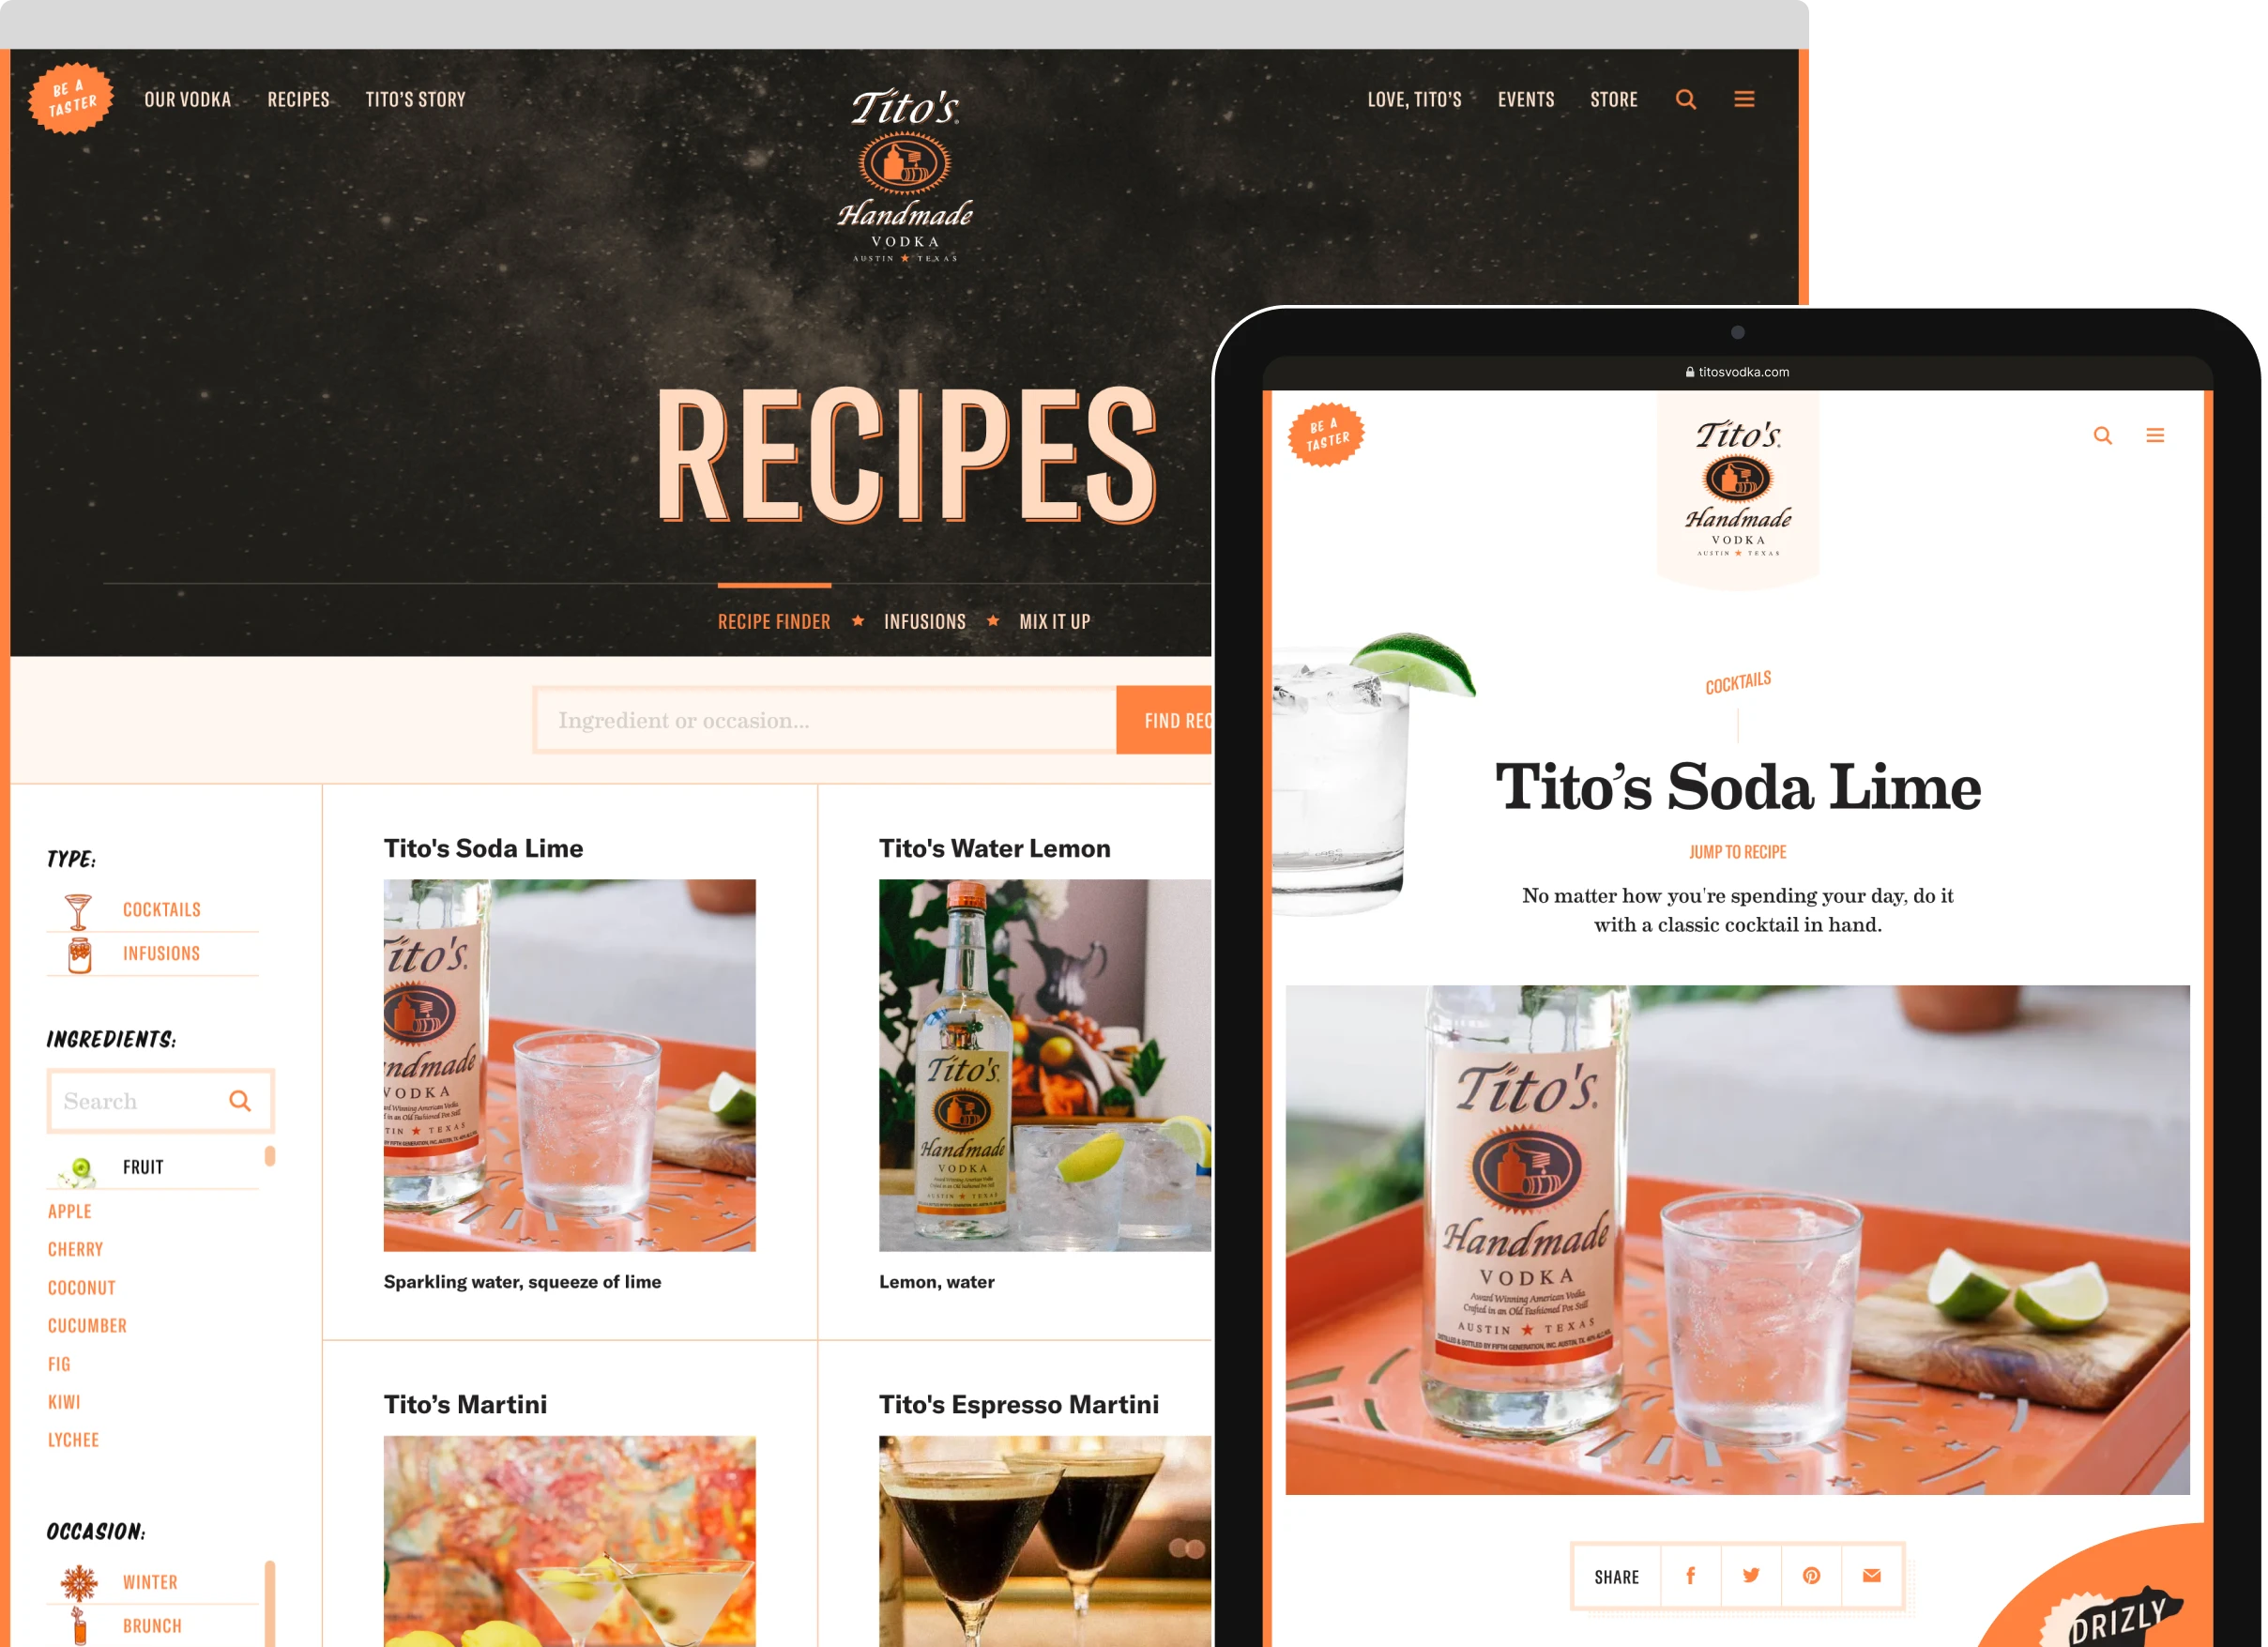 Screenshots of the Tito’s website